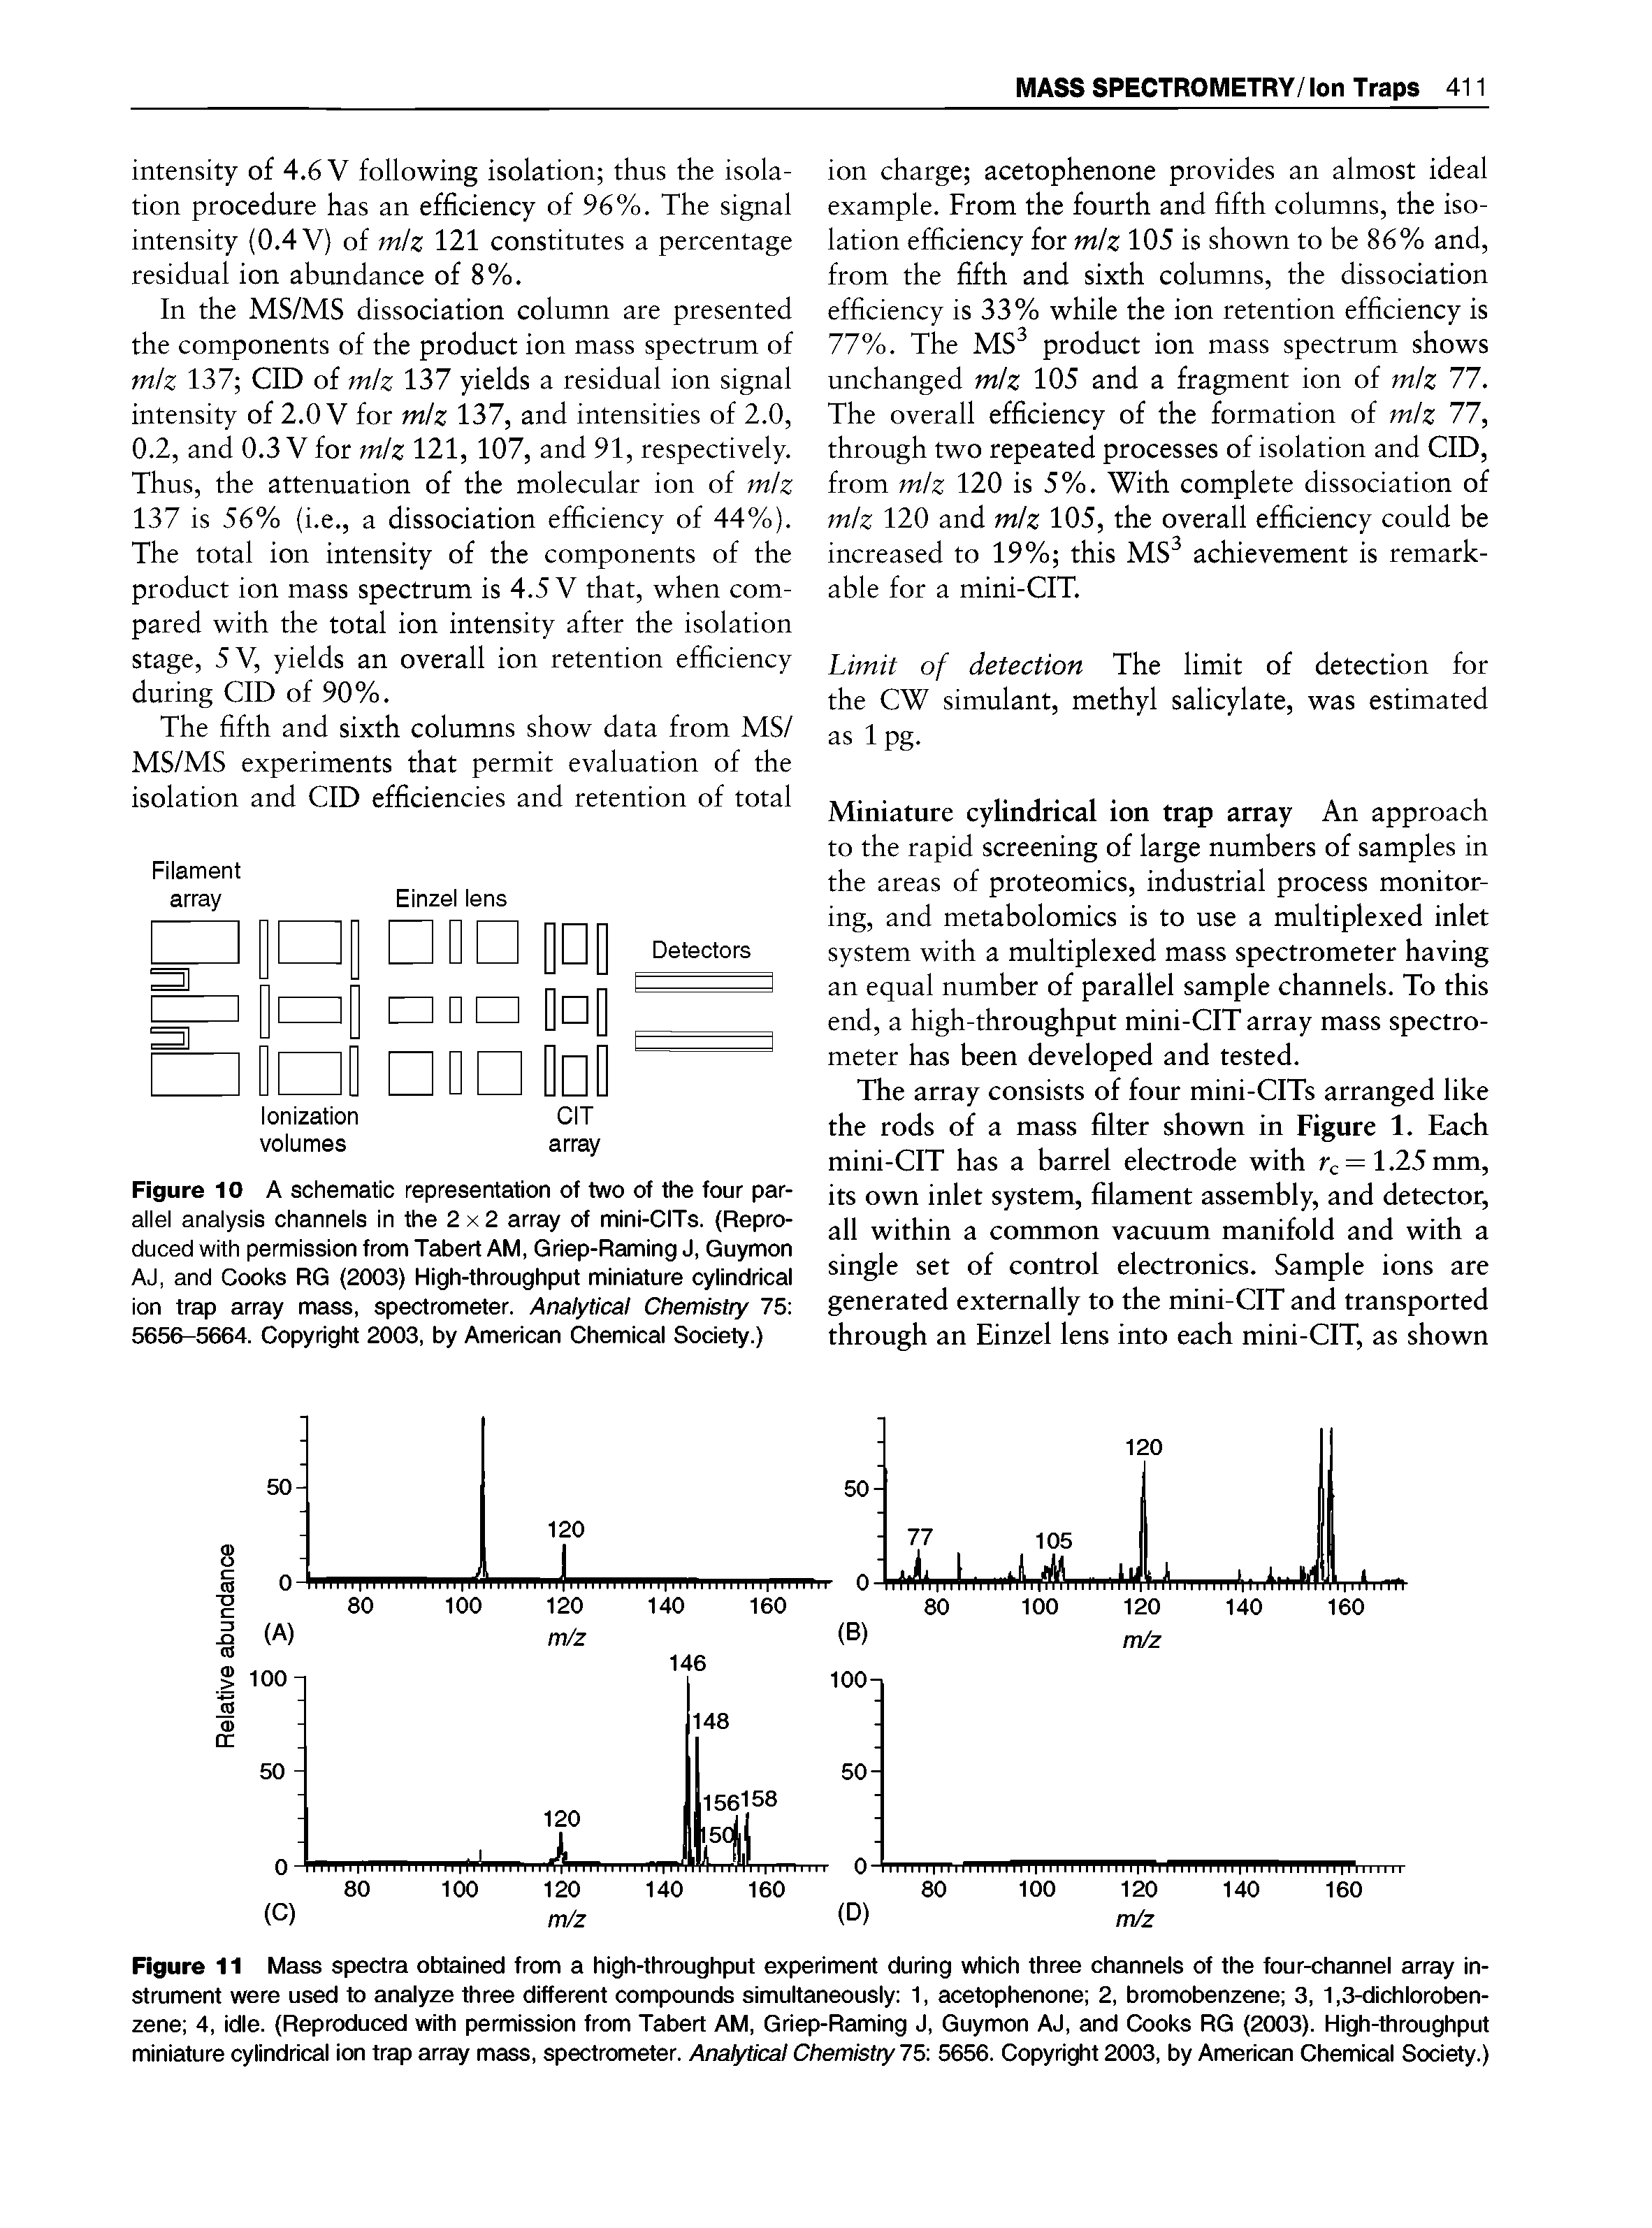 Figure 10 A schematic represerttation of two of the four parallel analysis channels in the 2 x 2 array of mini-CITs. (Reproduced with permission from Tabert AM, Griep-Raming J, Guymon AJ, and Cooks RG (2003) High-throughput miniature cylindrical ion trap array mass, spectrometer. Analytical Chemistry 75 5656-5664. Copyright 2003, by American Chemical Society.)...